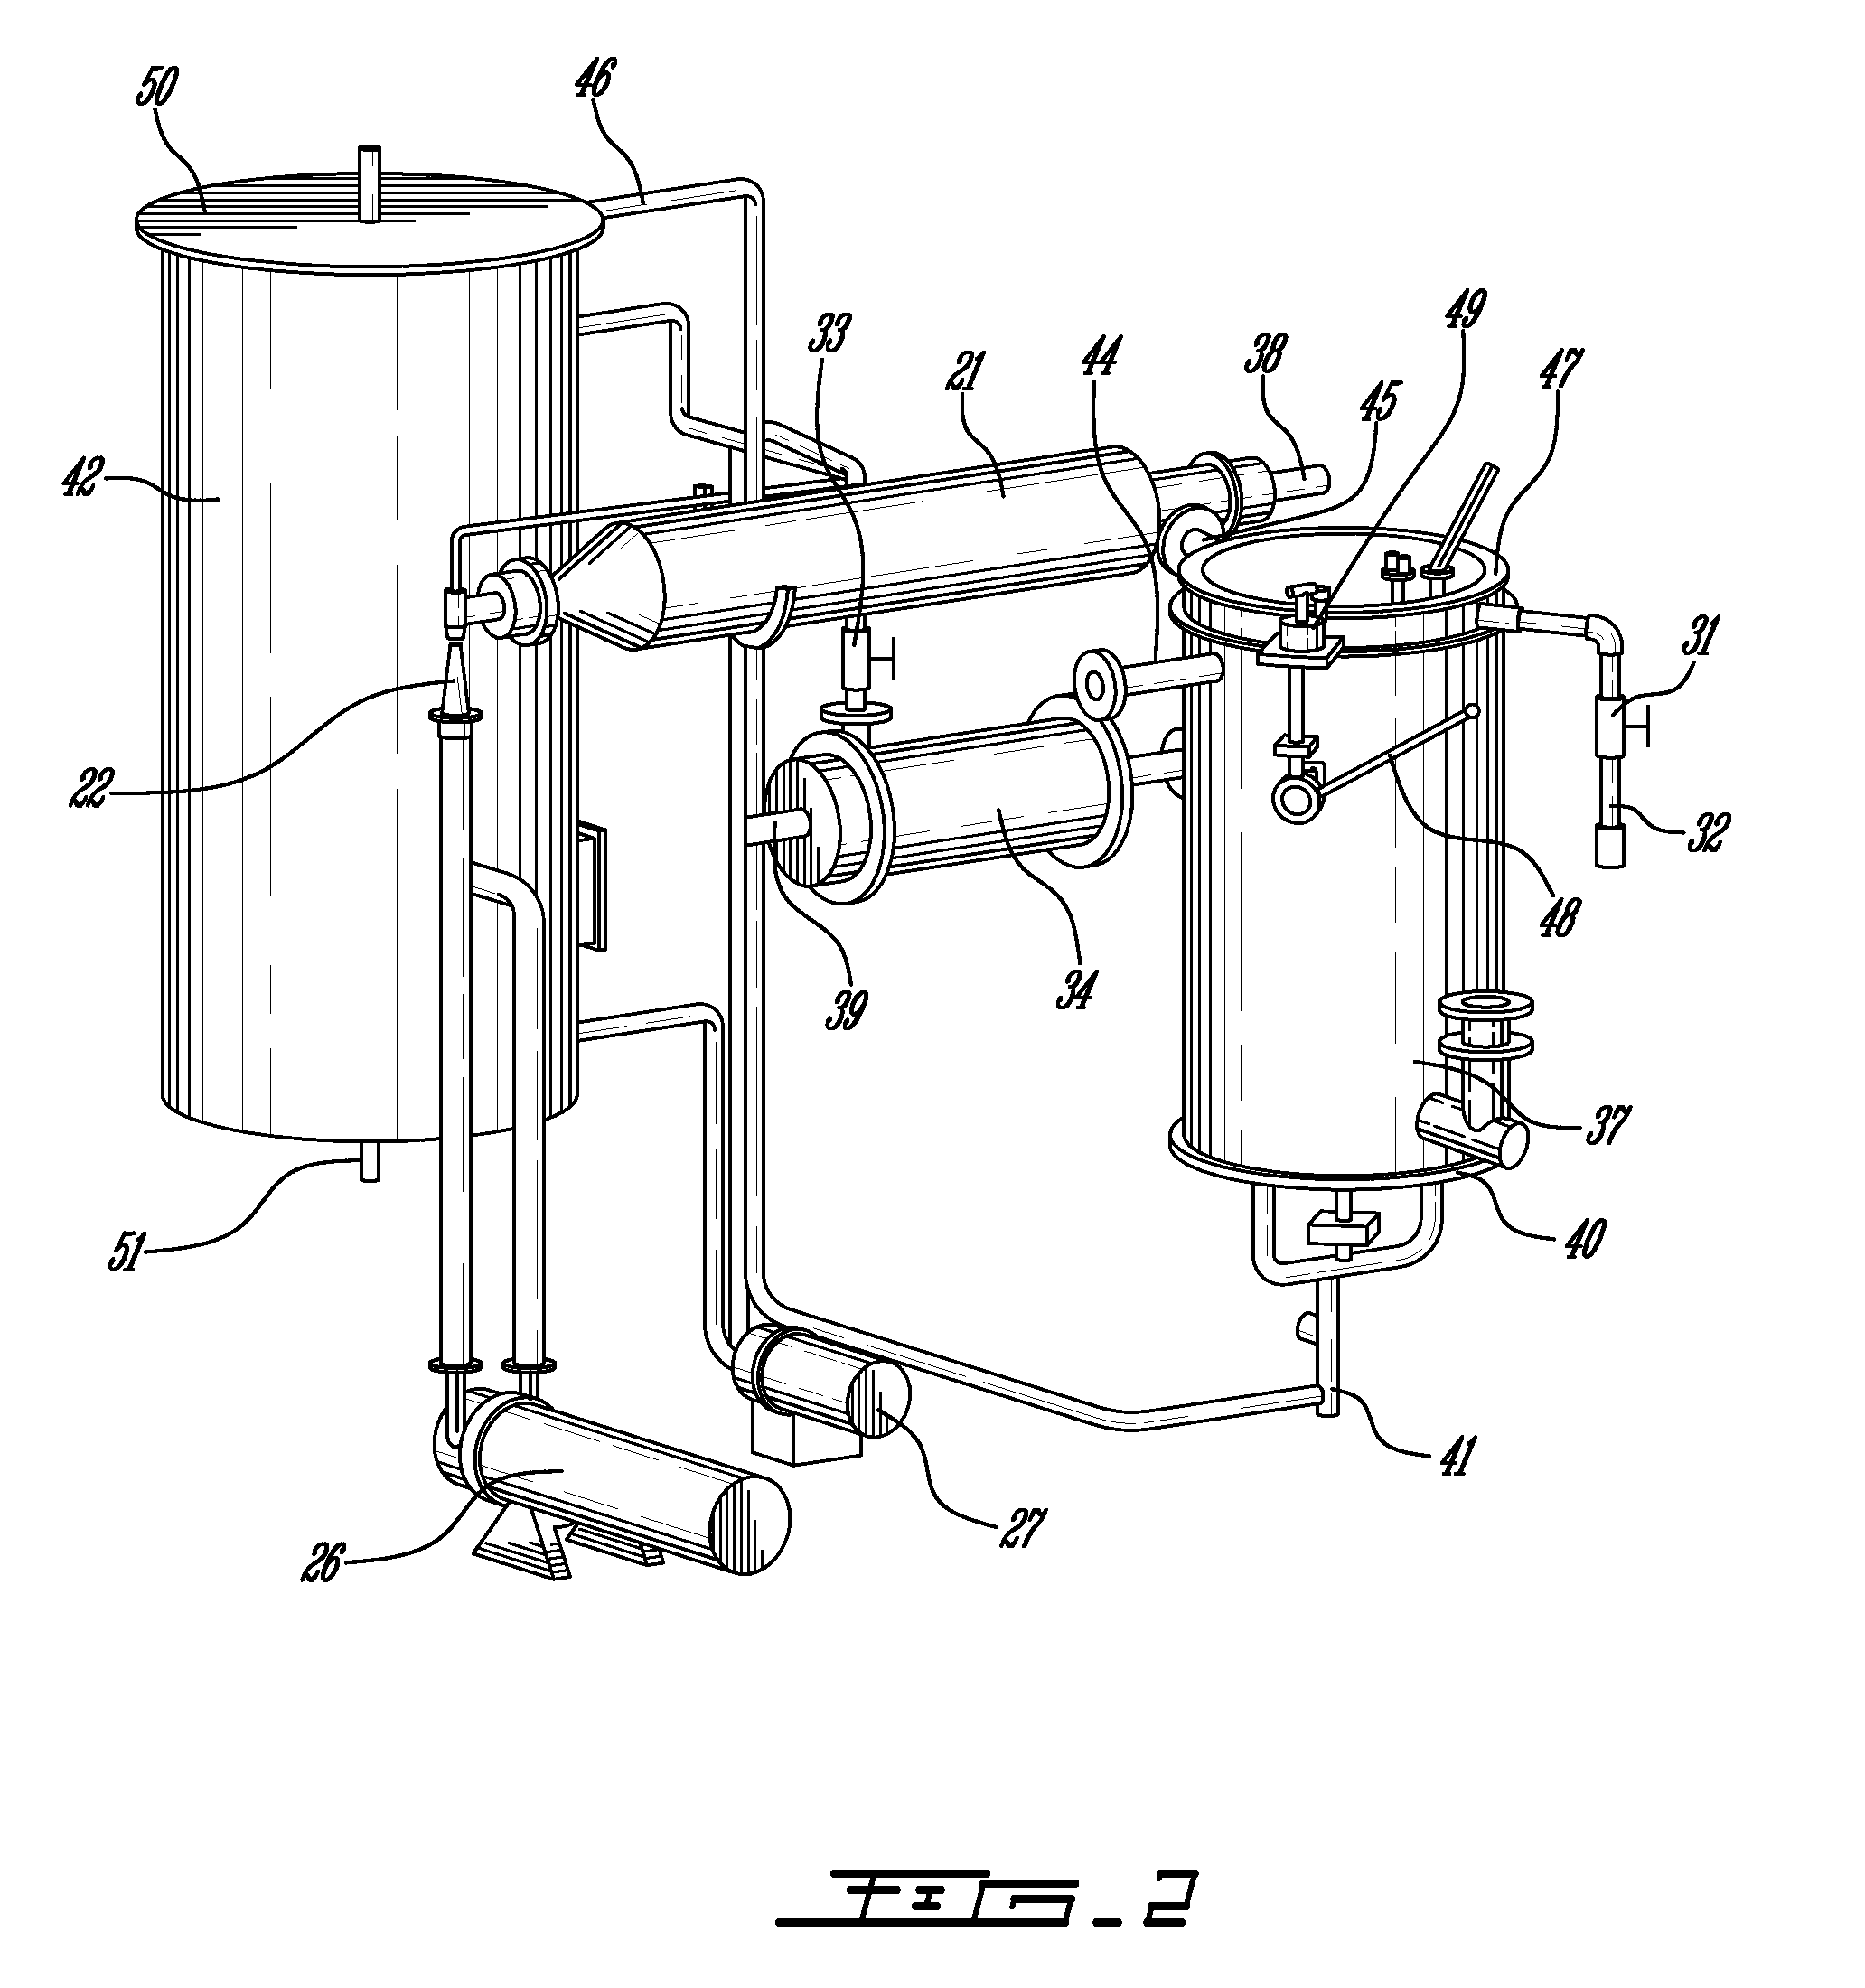 Method and apparatus for gasification of organic waste in batches